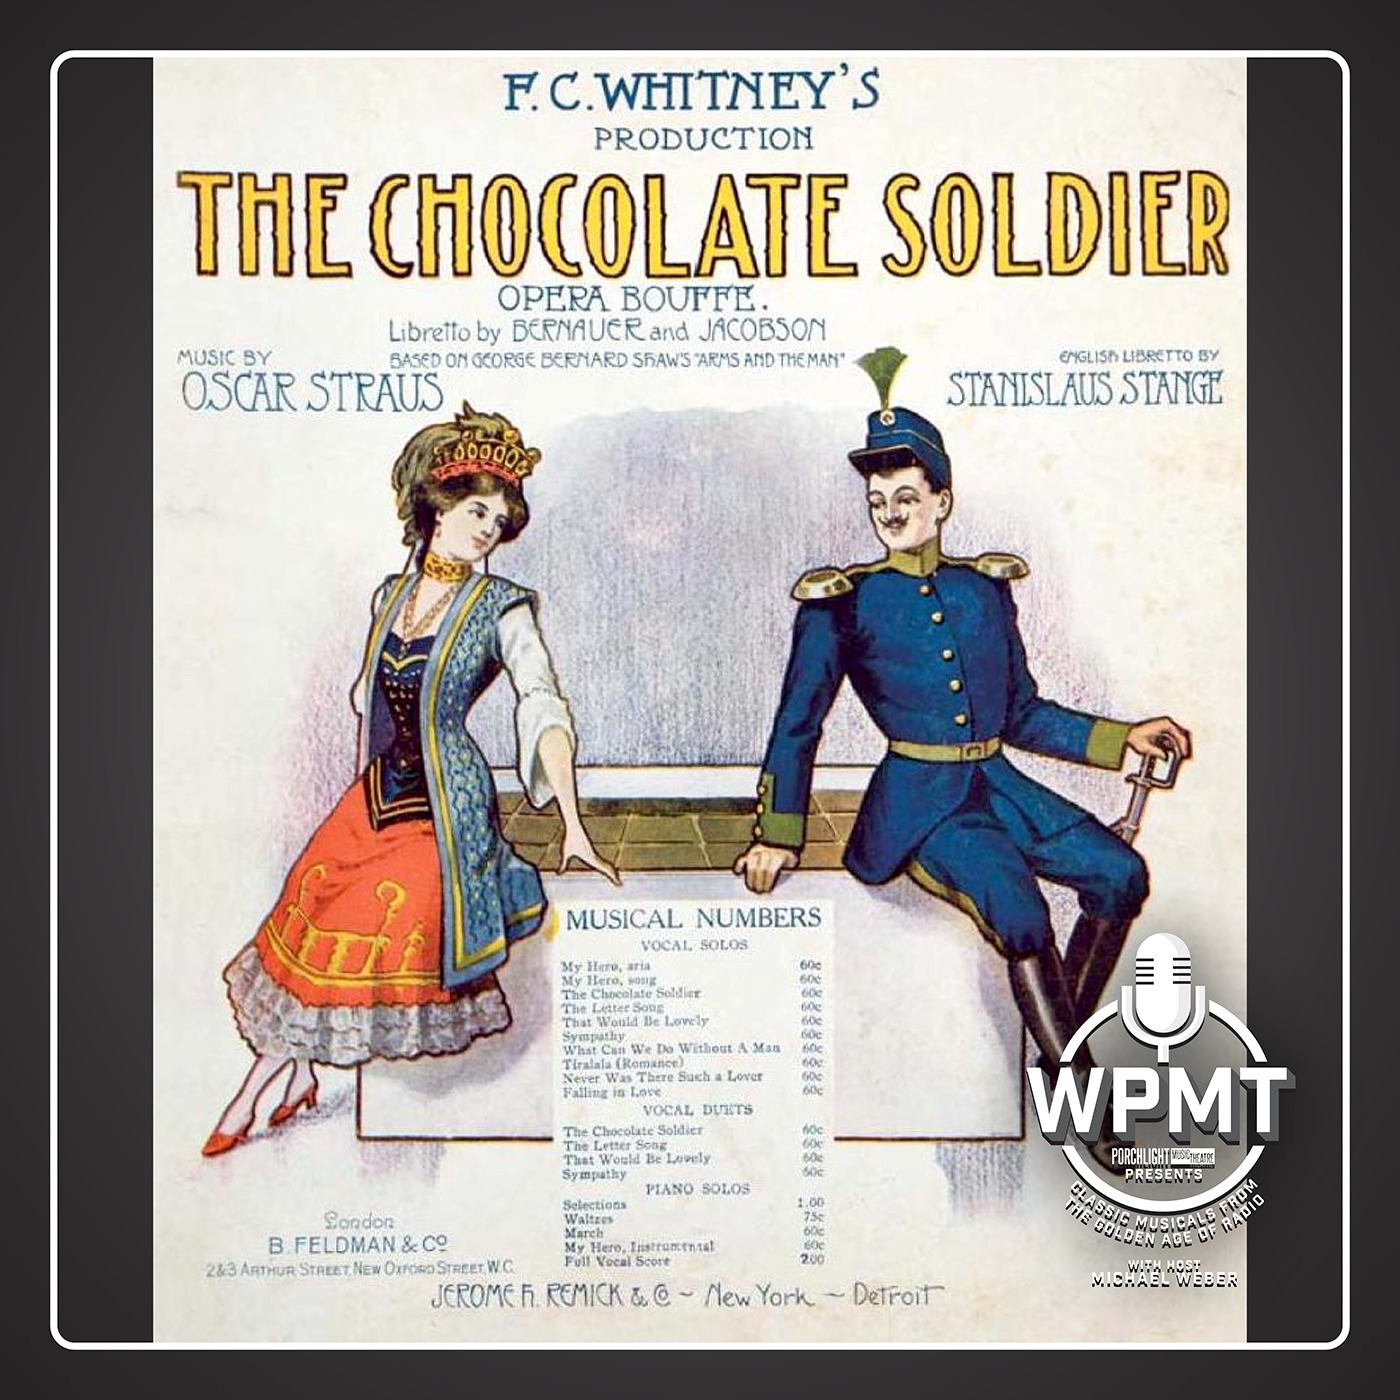 WPMT #41: The Chocolate Soldier